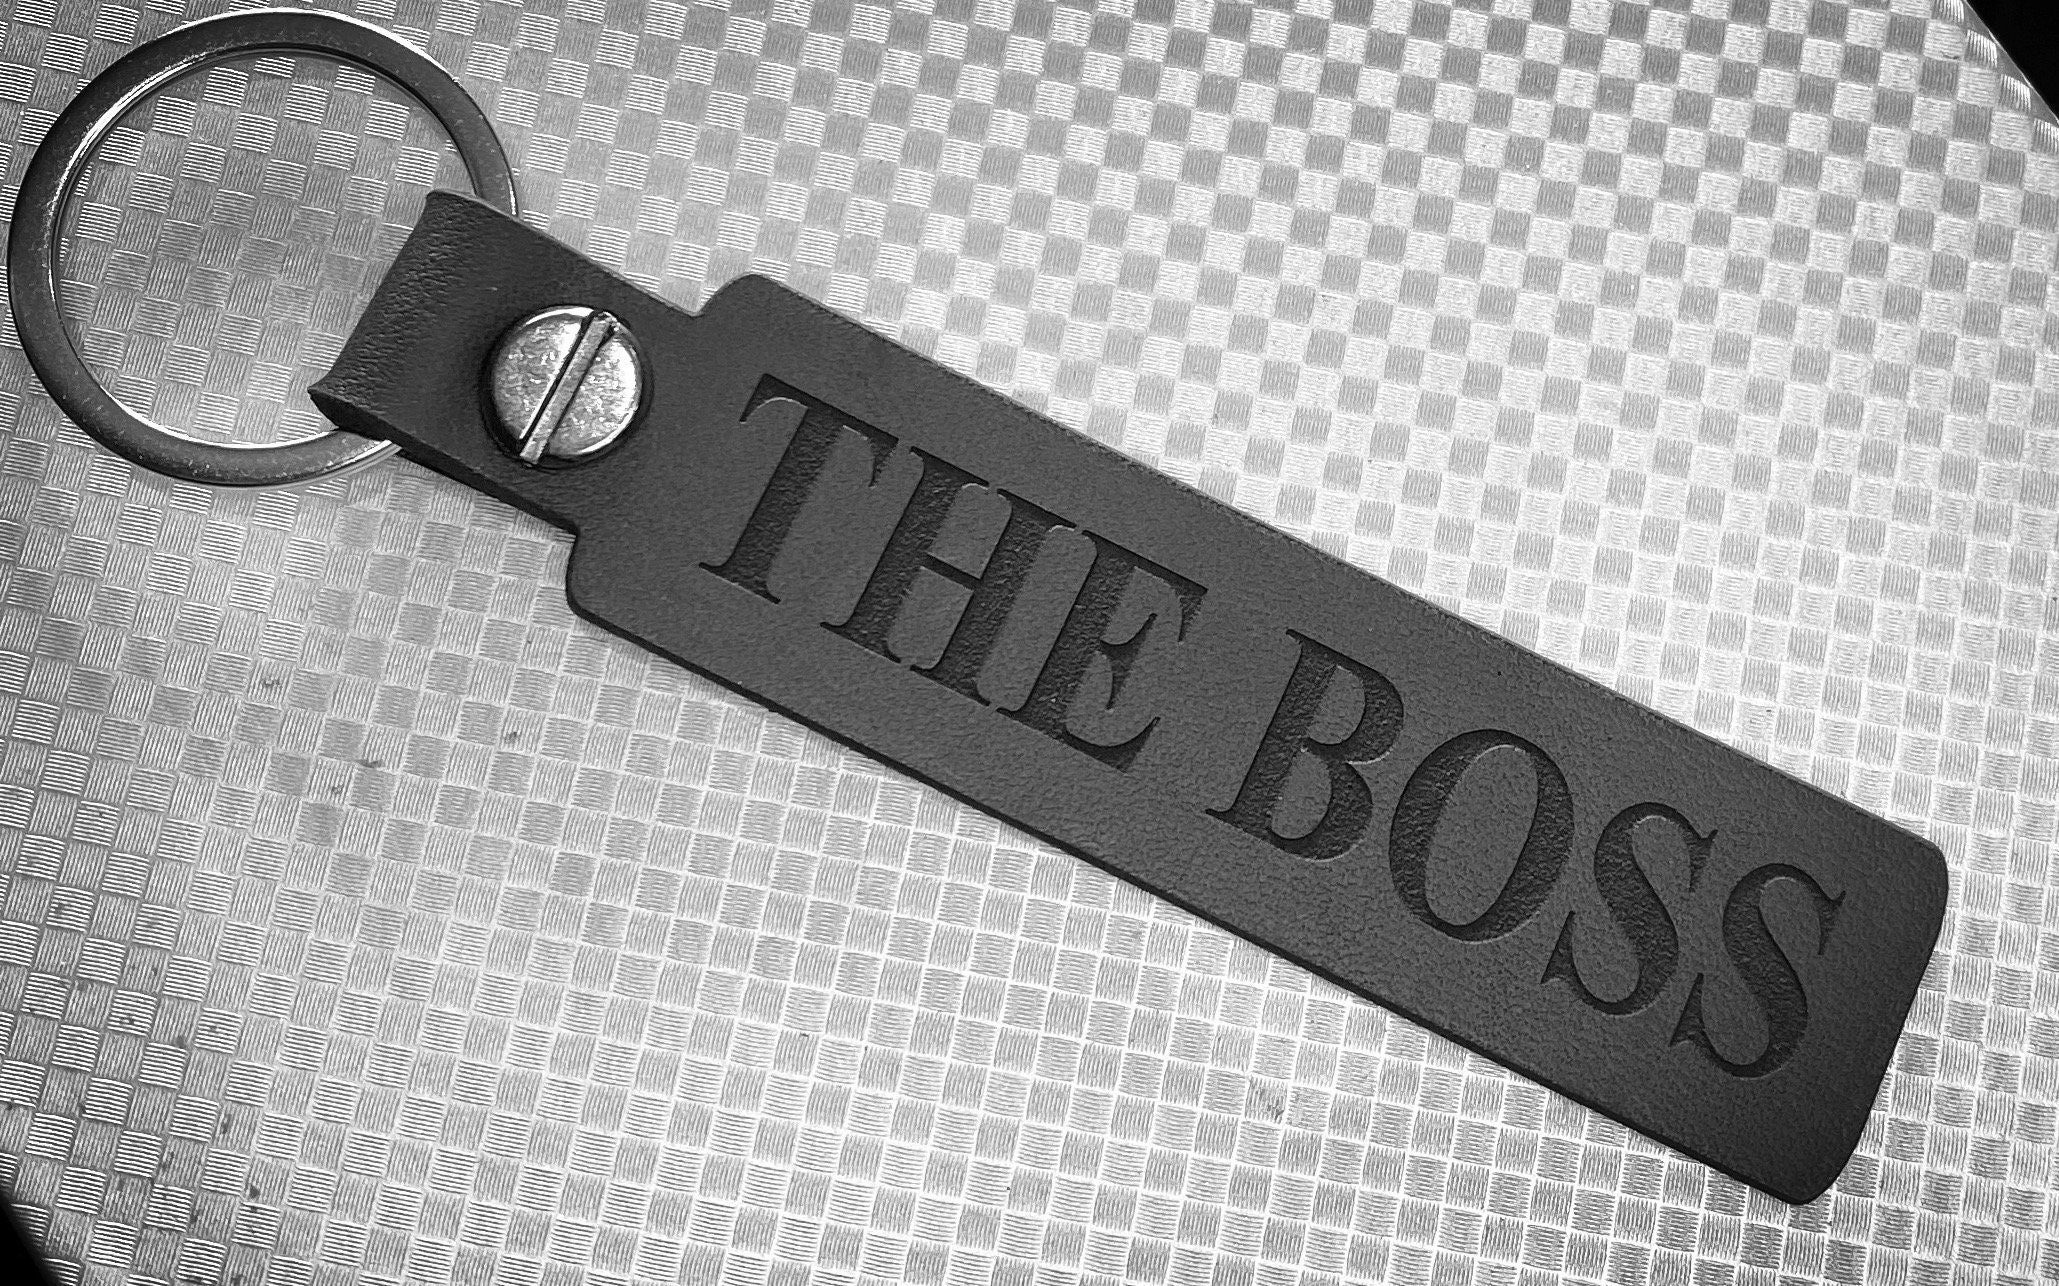 Relaterede Bule ale THE BOSS Black Leather Key Chain Keyring Fob Great Gift - Etsy